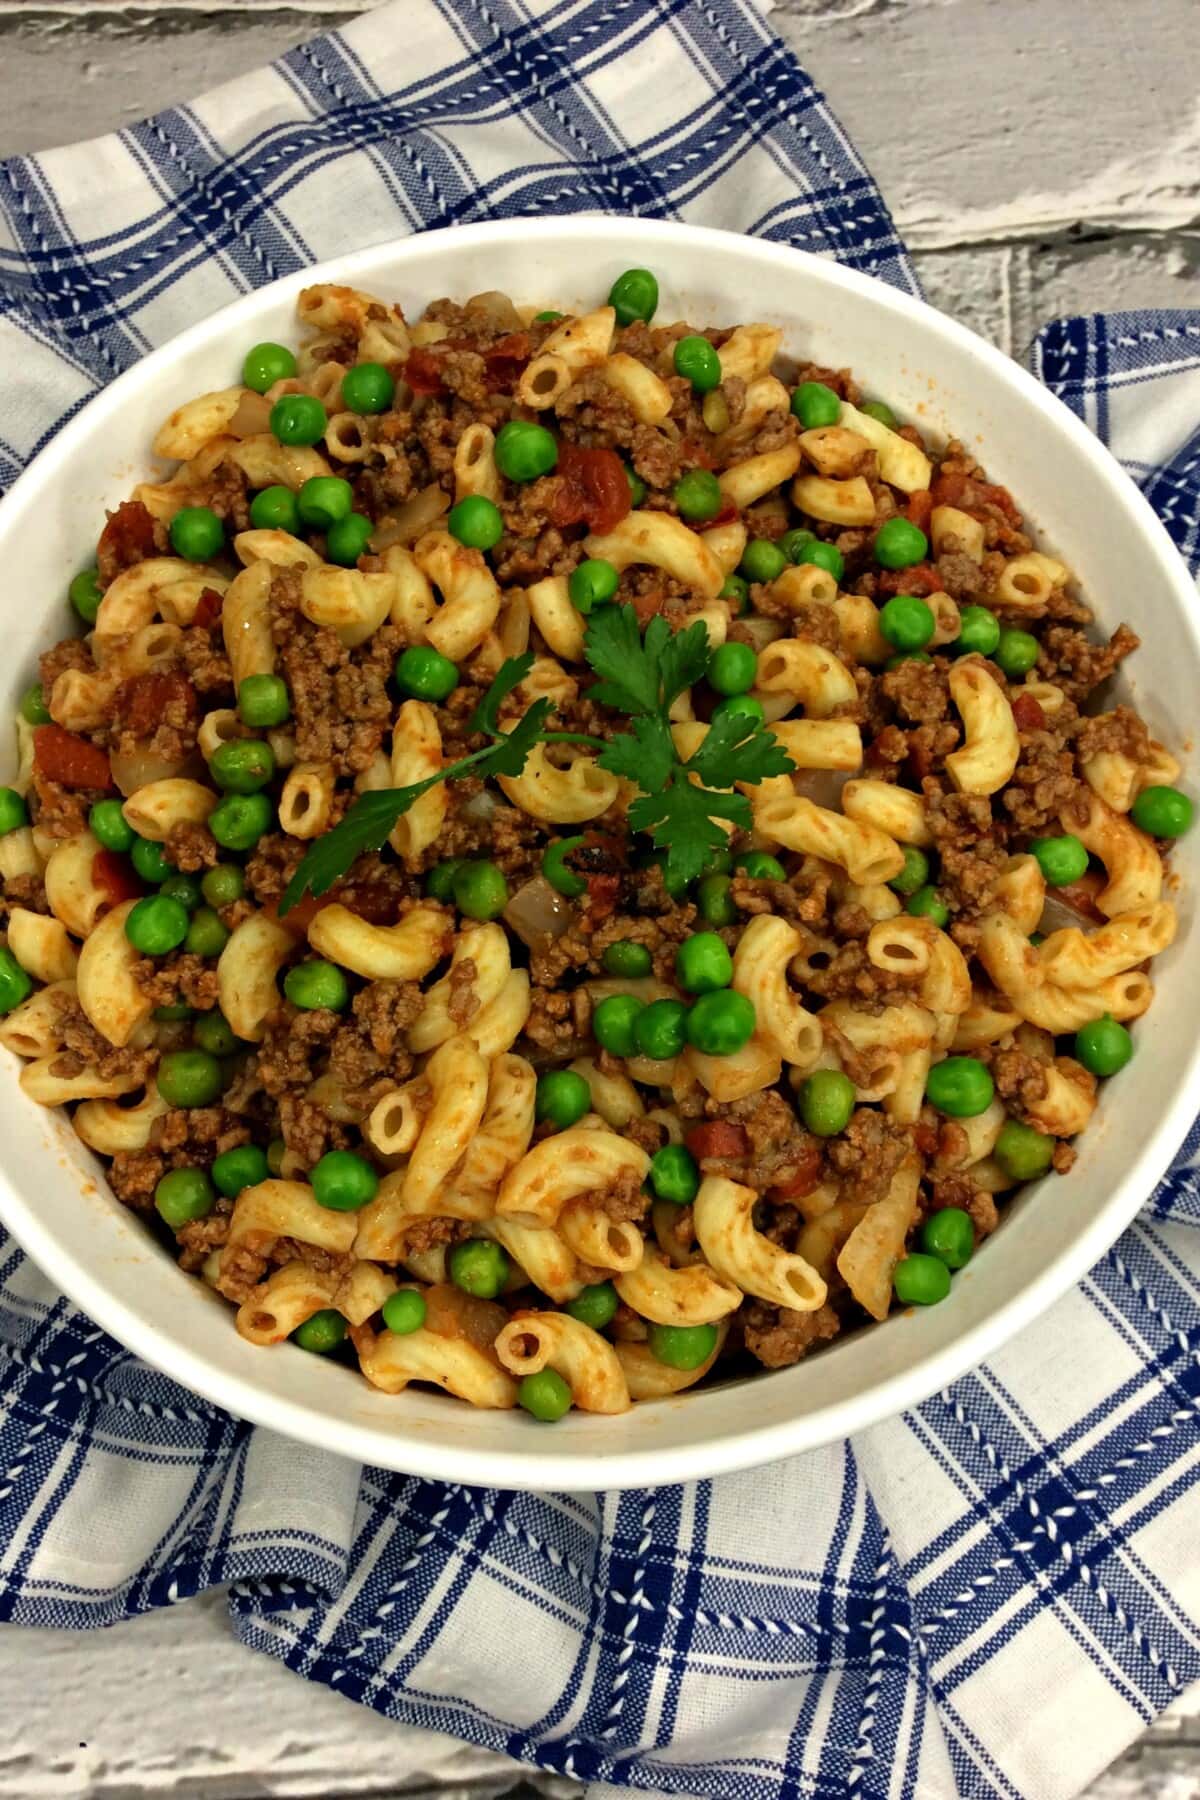 Irish Pasta with ground beef and peas in a bowl